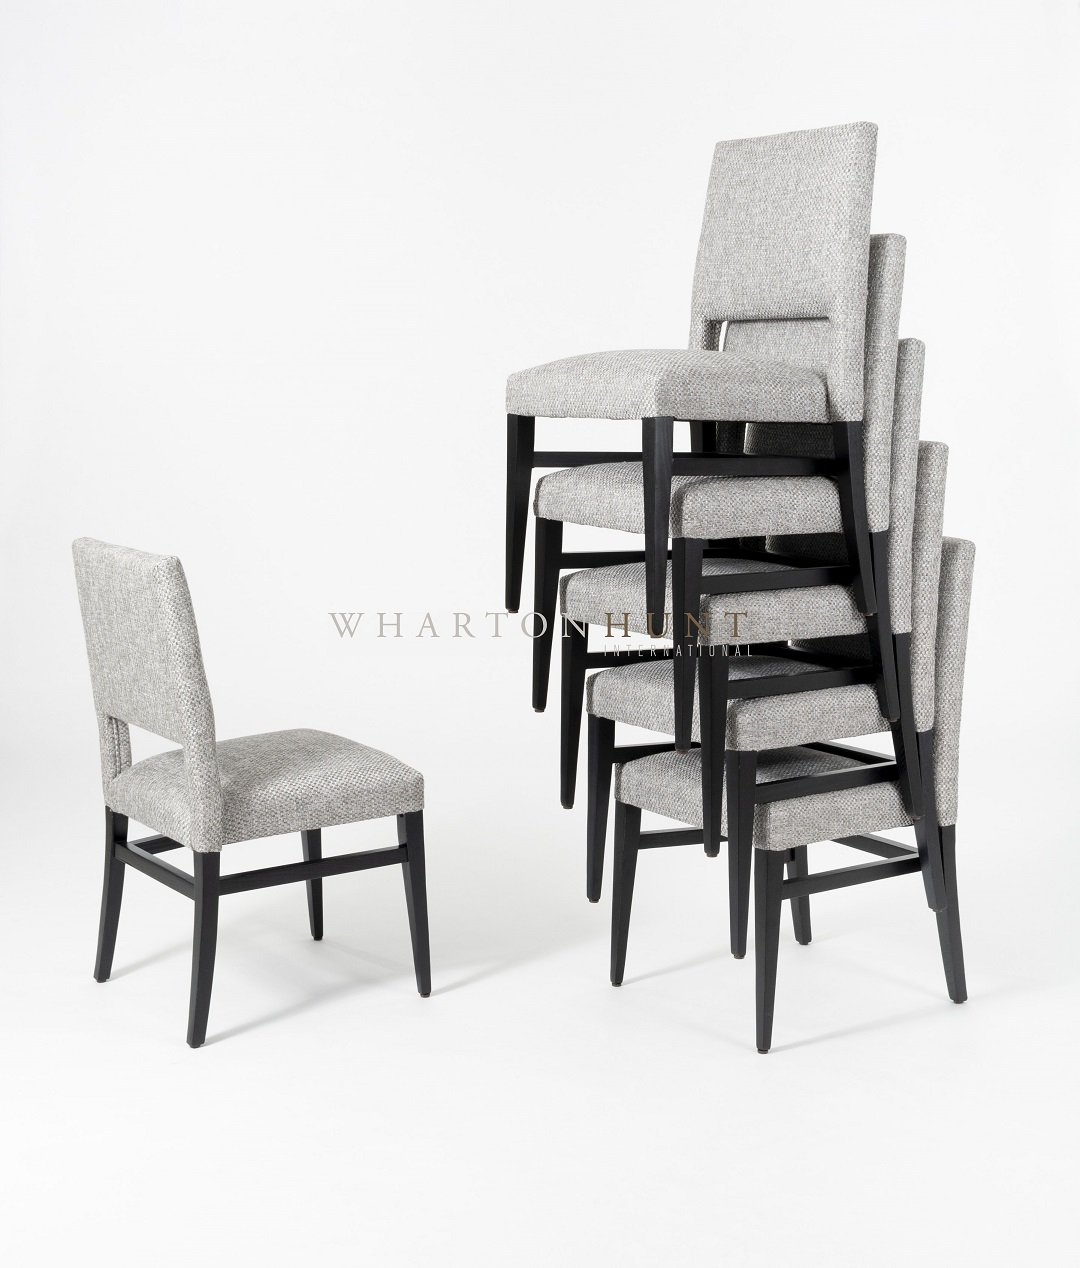 Custom Upholstered Stacking Chairs